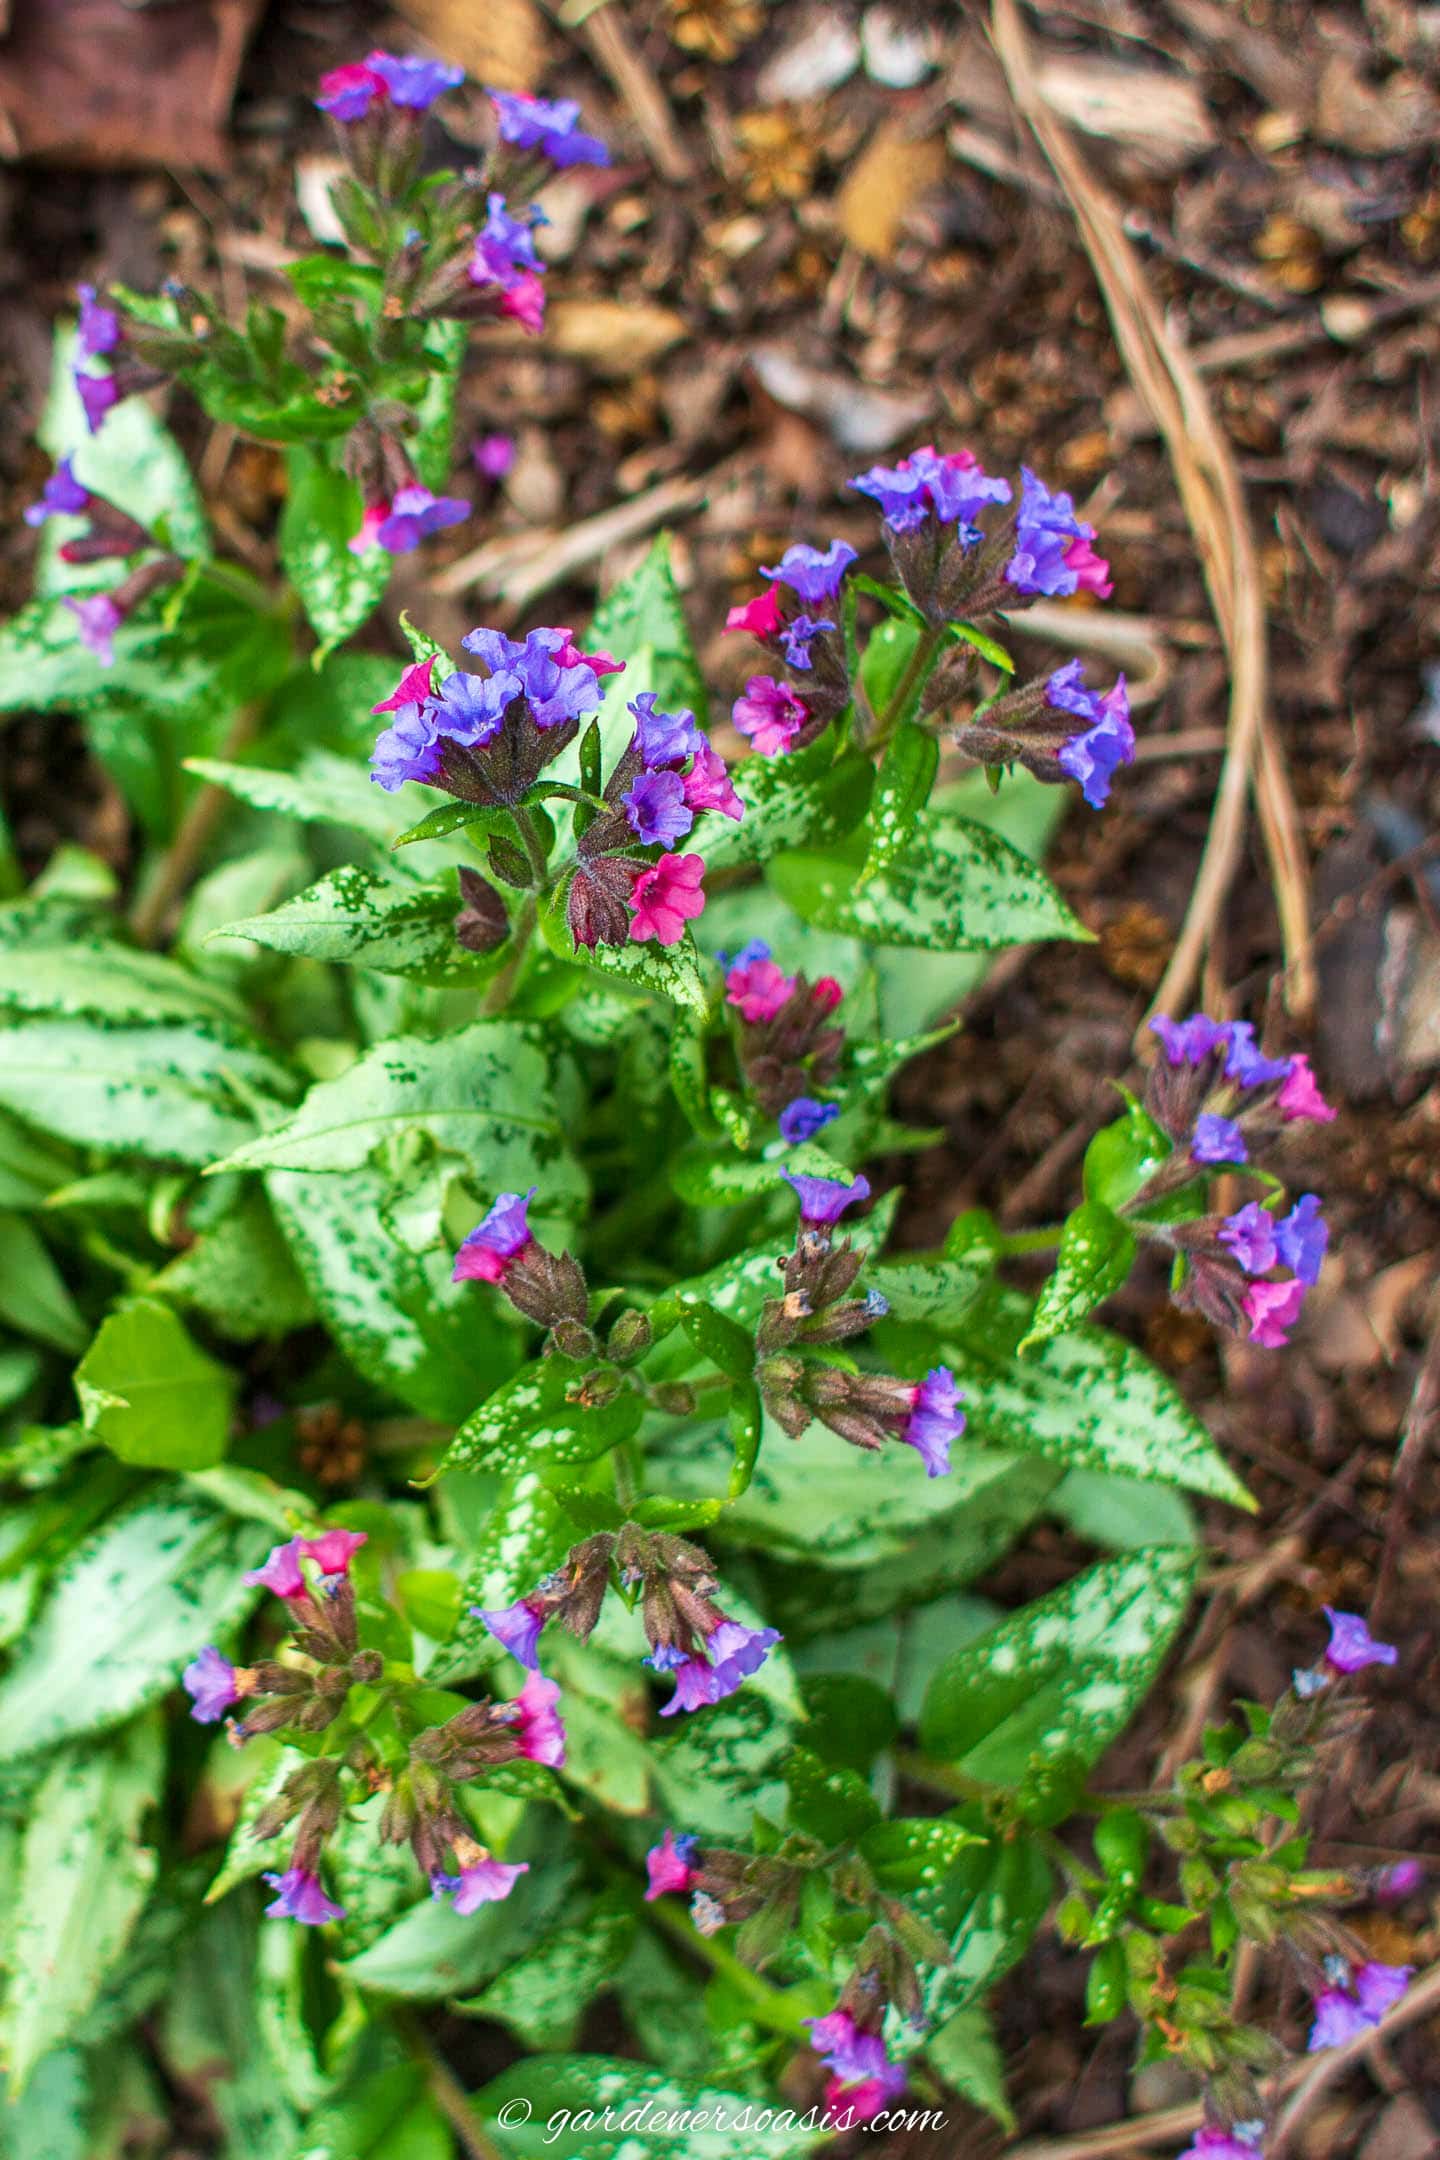 Pulmonaria with purple and pink flowers in early spring